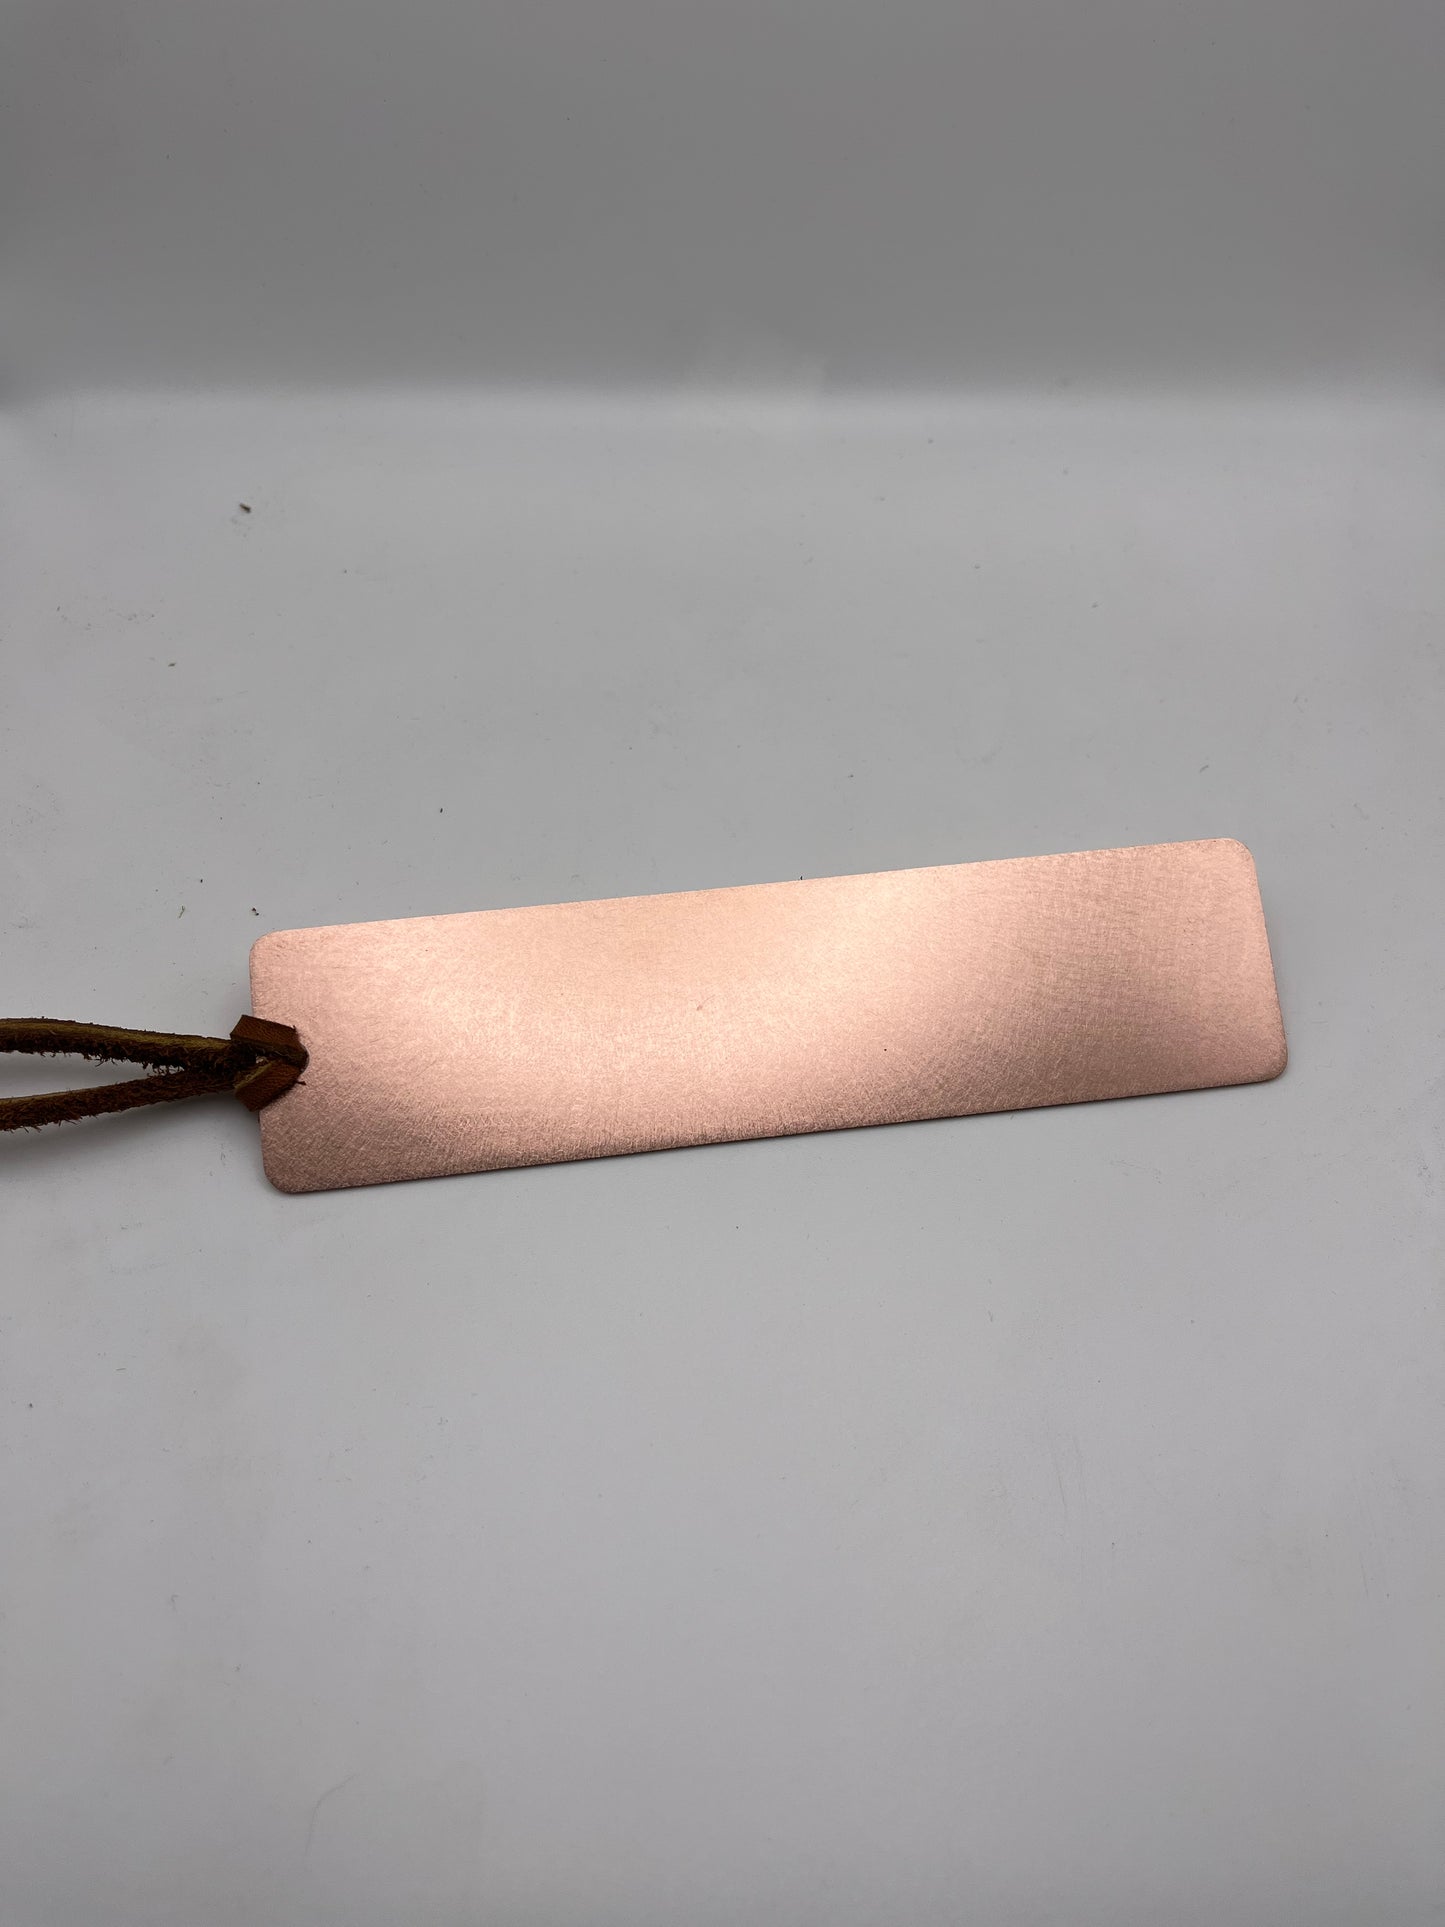 Brass and Copper Bookmarks w/ leather tassel, personalized, raw finish or clear coated